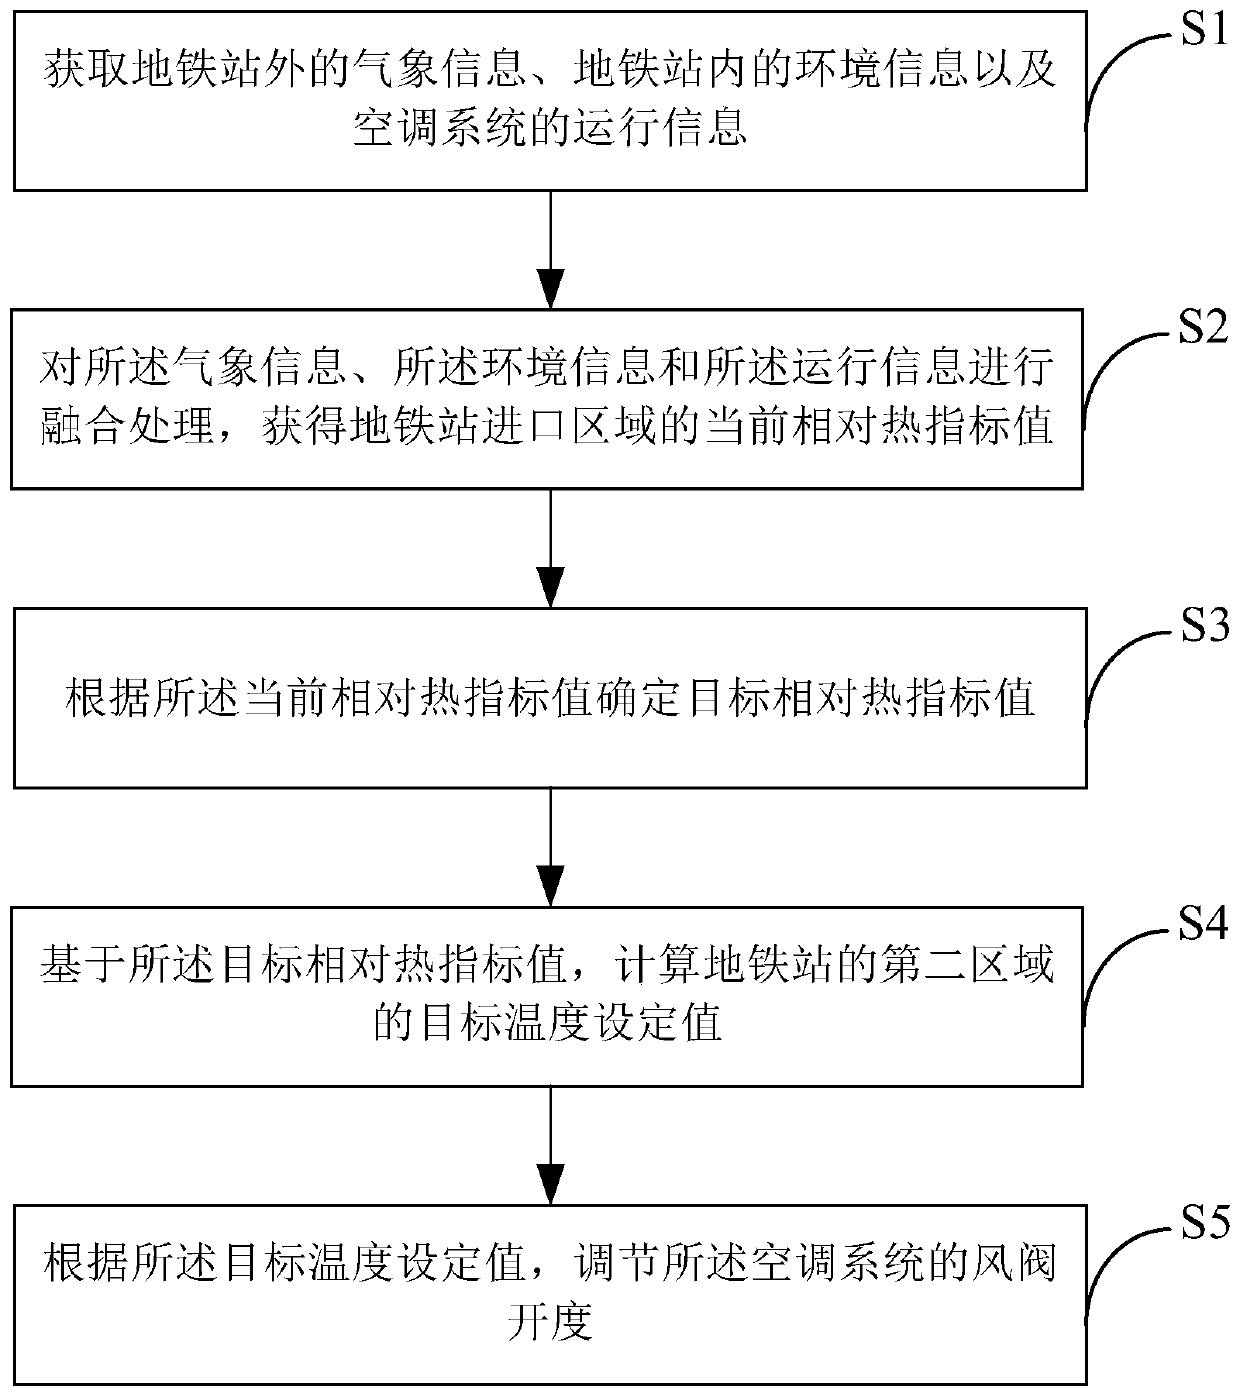 Subway station air-conditioning system energy-saving control method and system based on multi-source information fusion